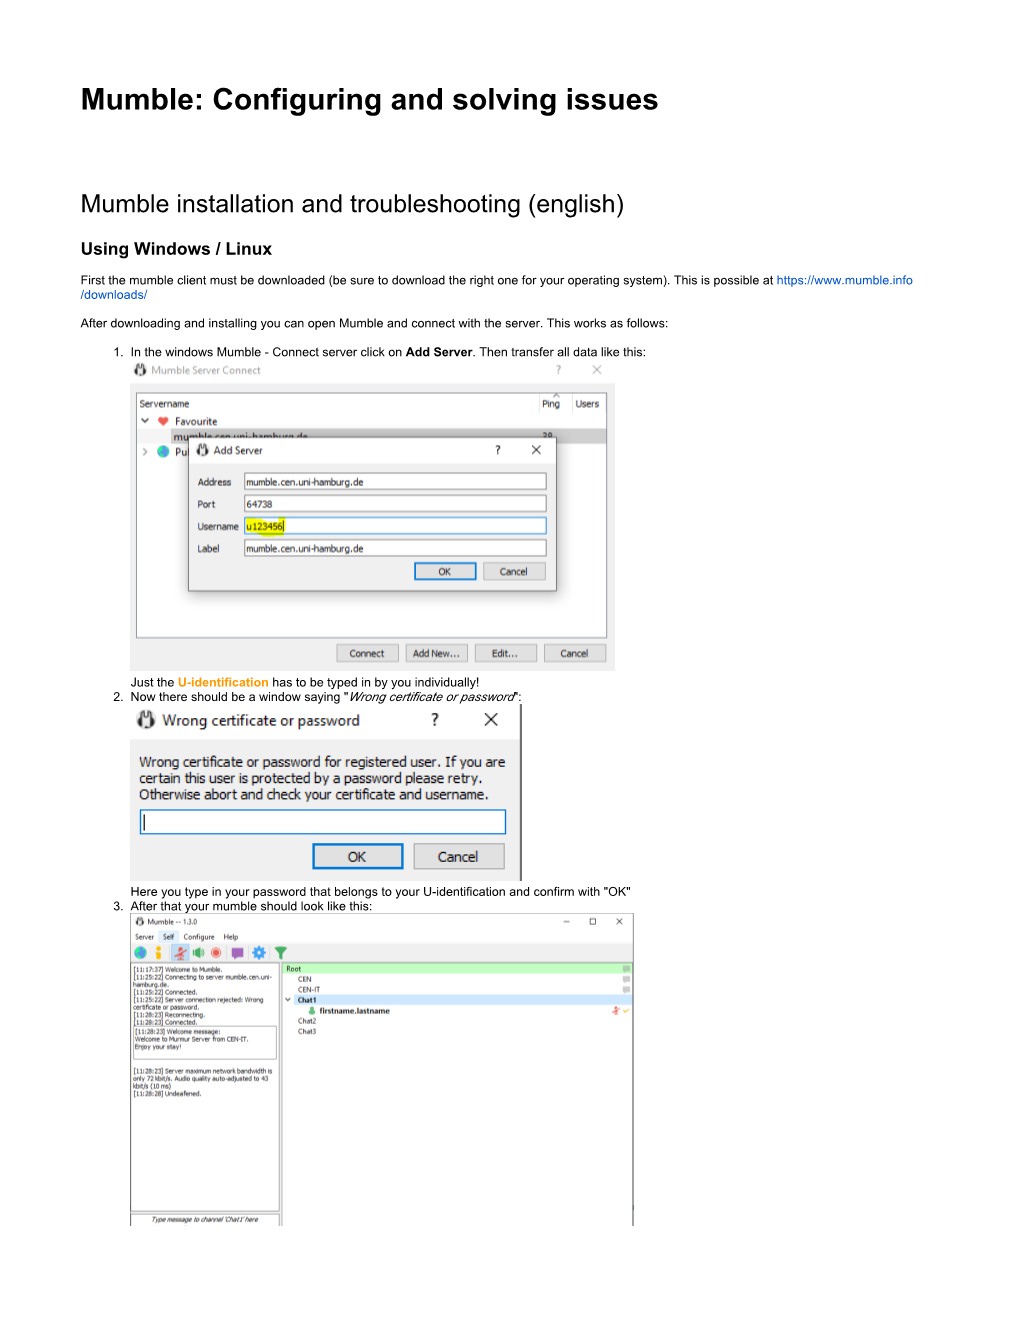 Mumble: Configuring and Solving Issues